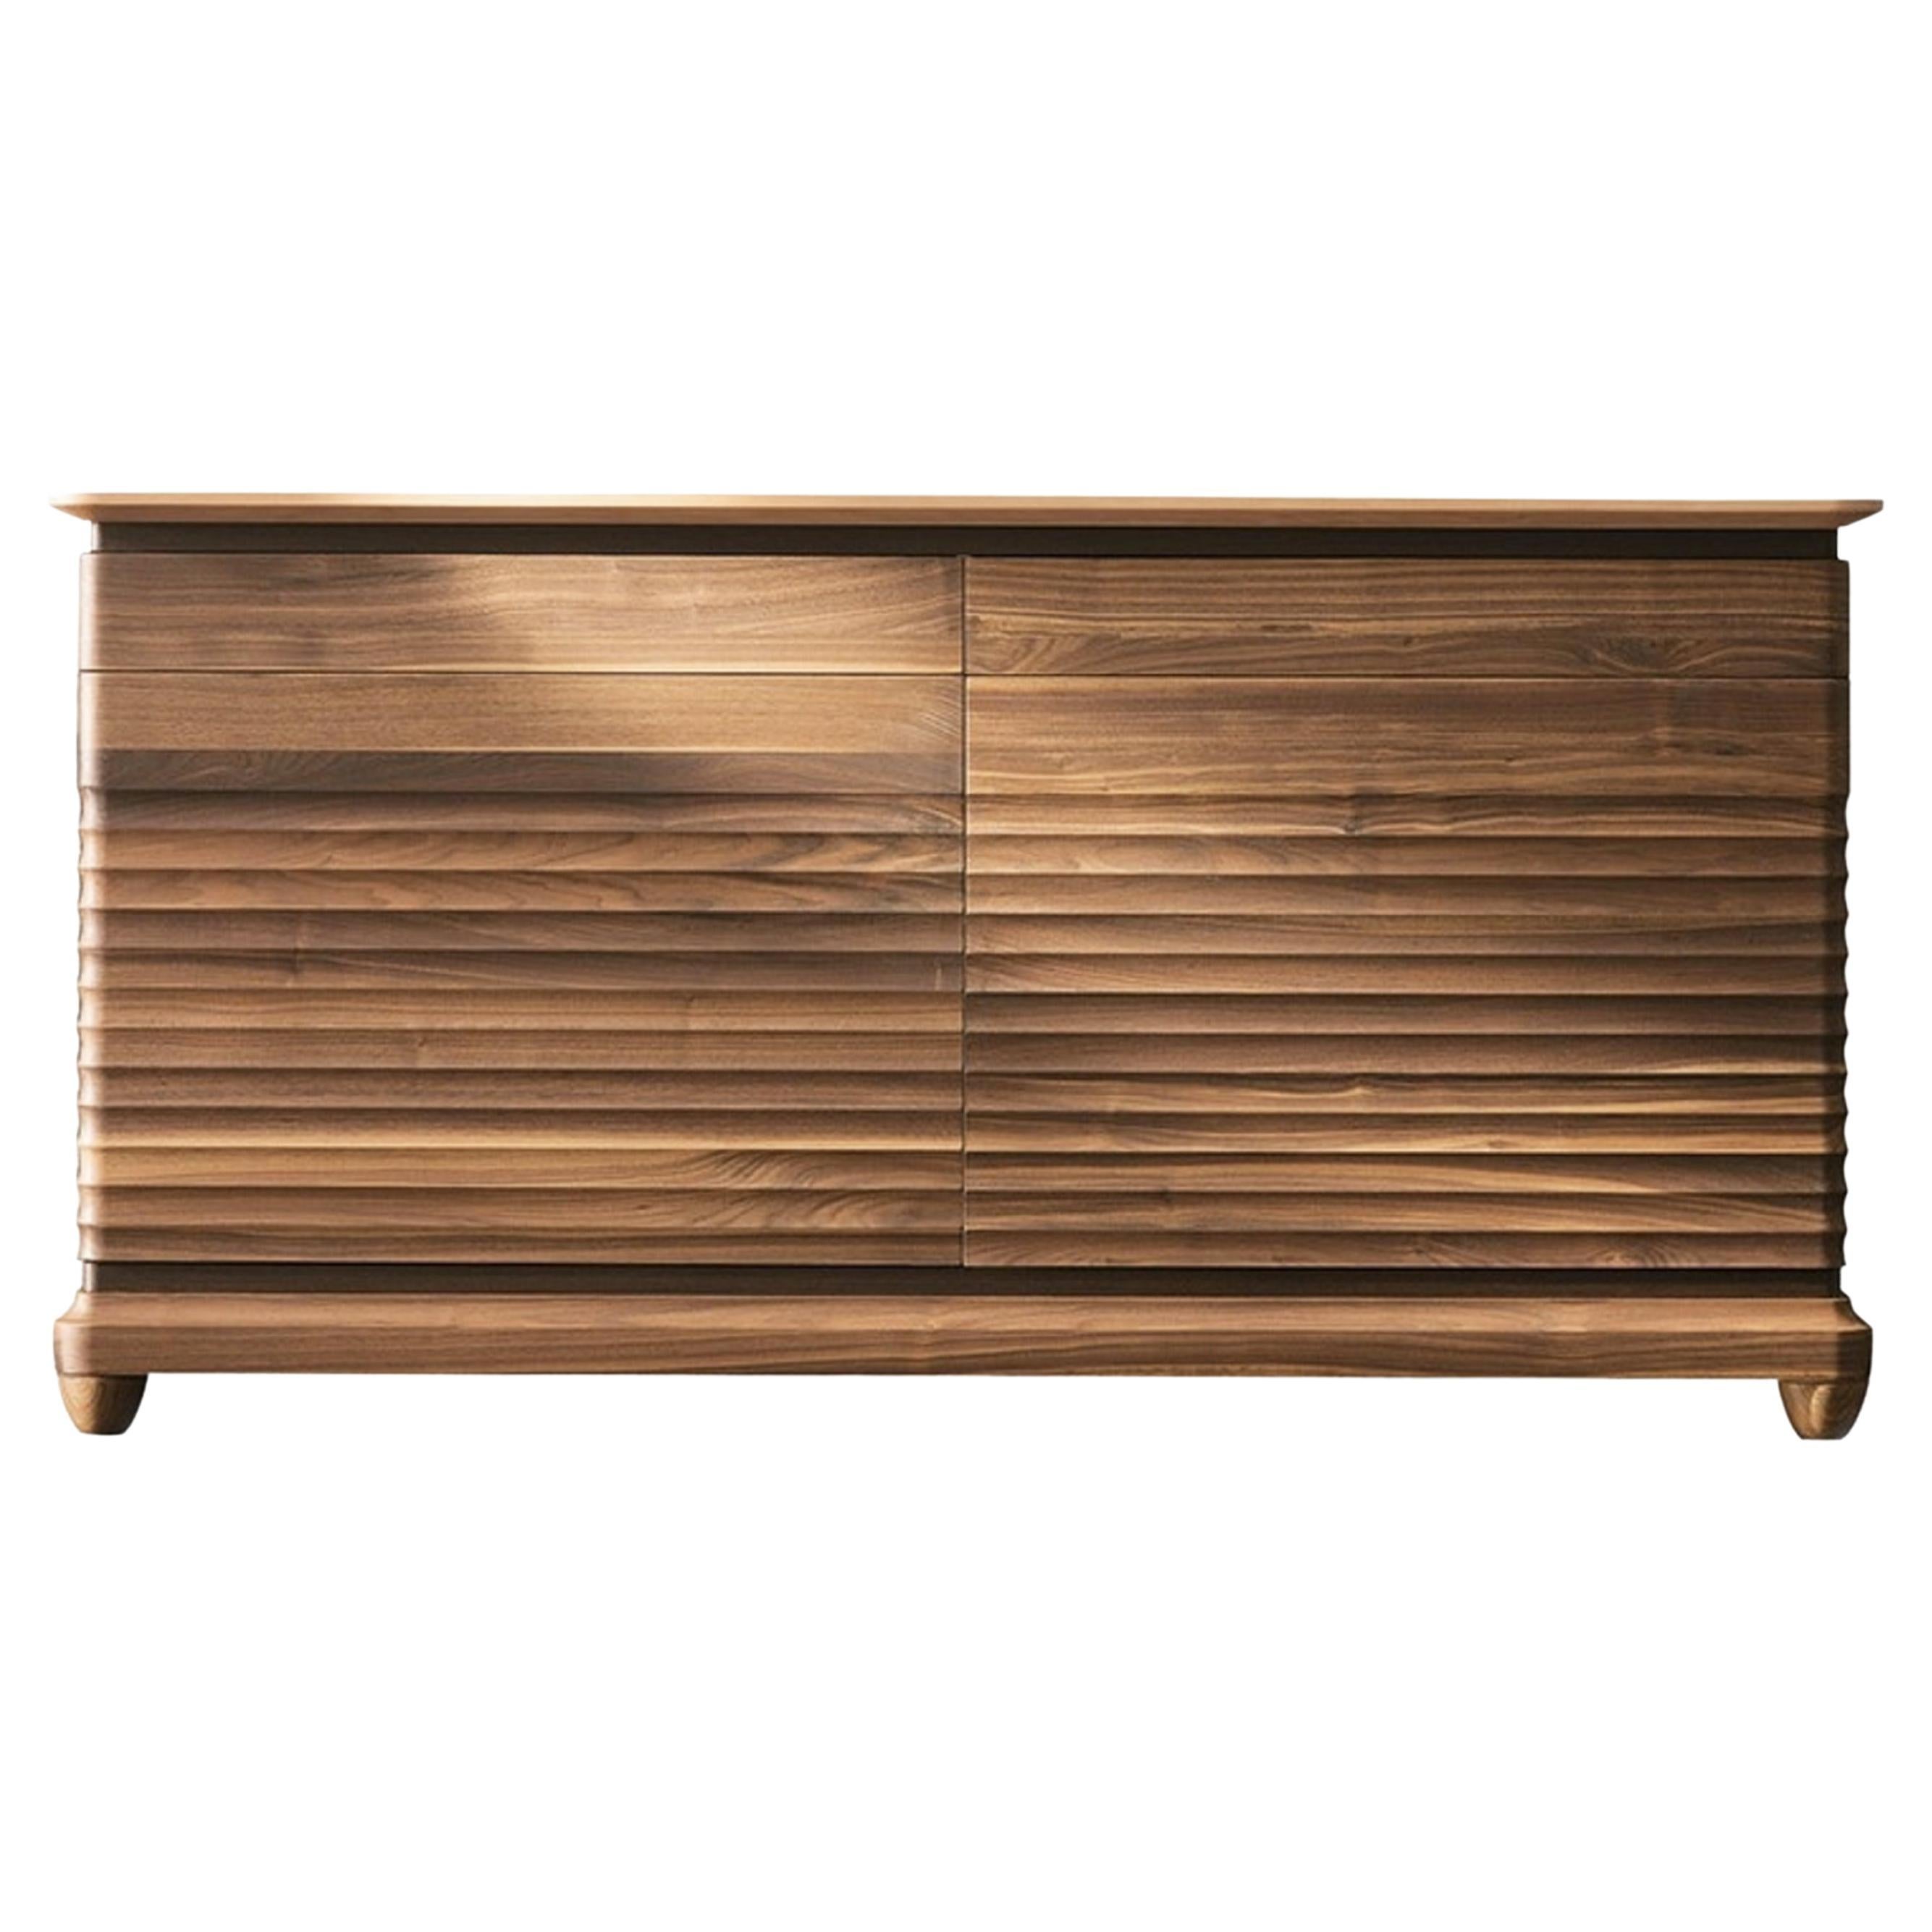 Traccia Solid Wood Sideboard, Walnut in Natural Finish, Contemporary